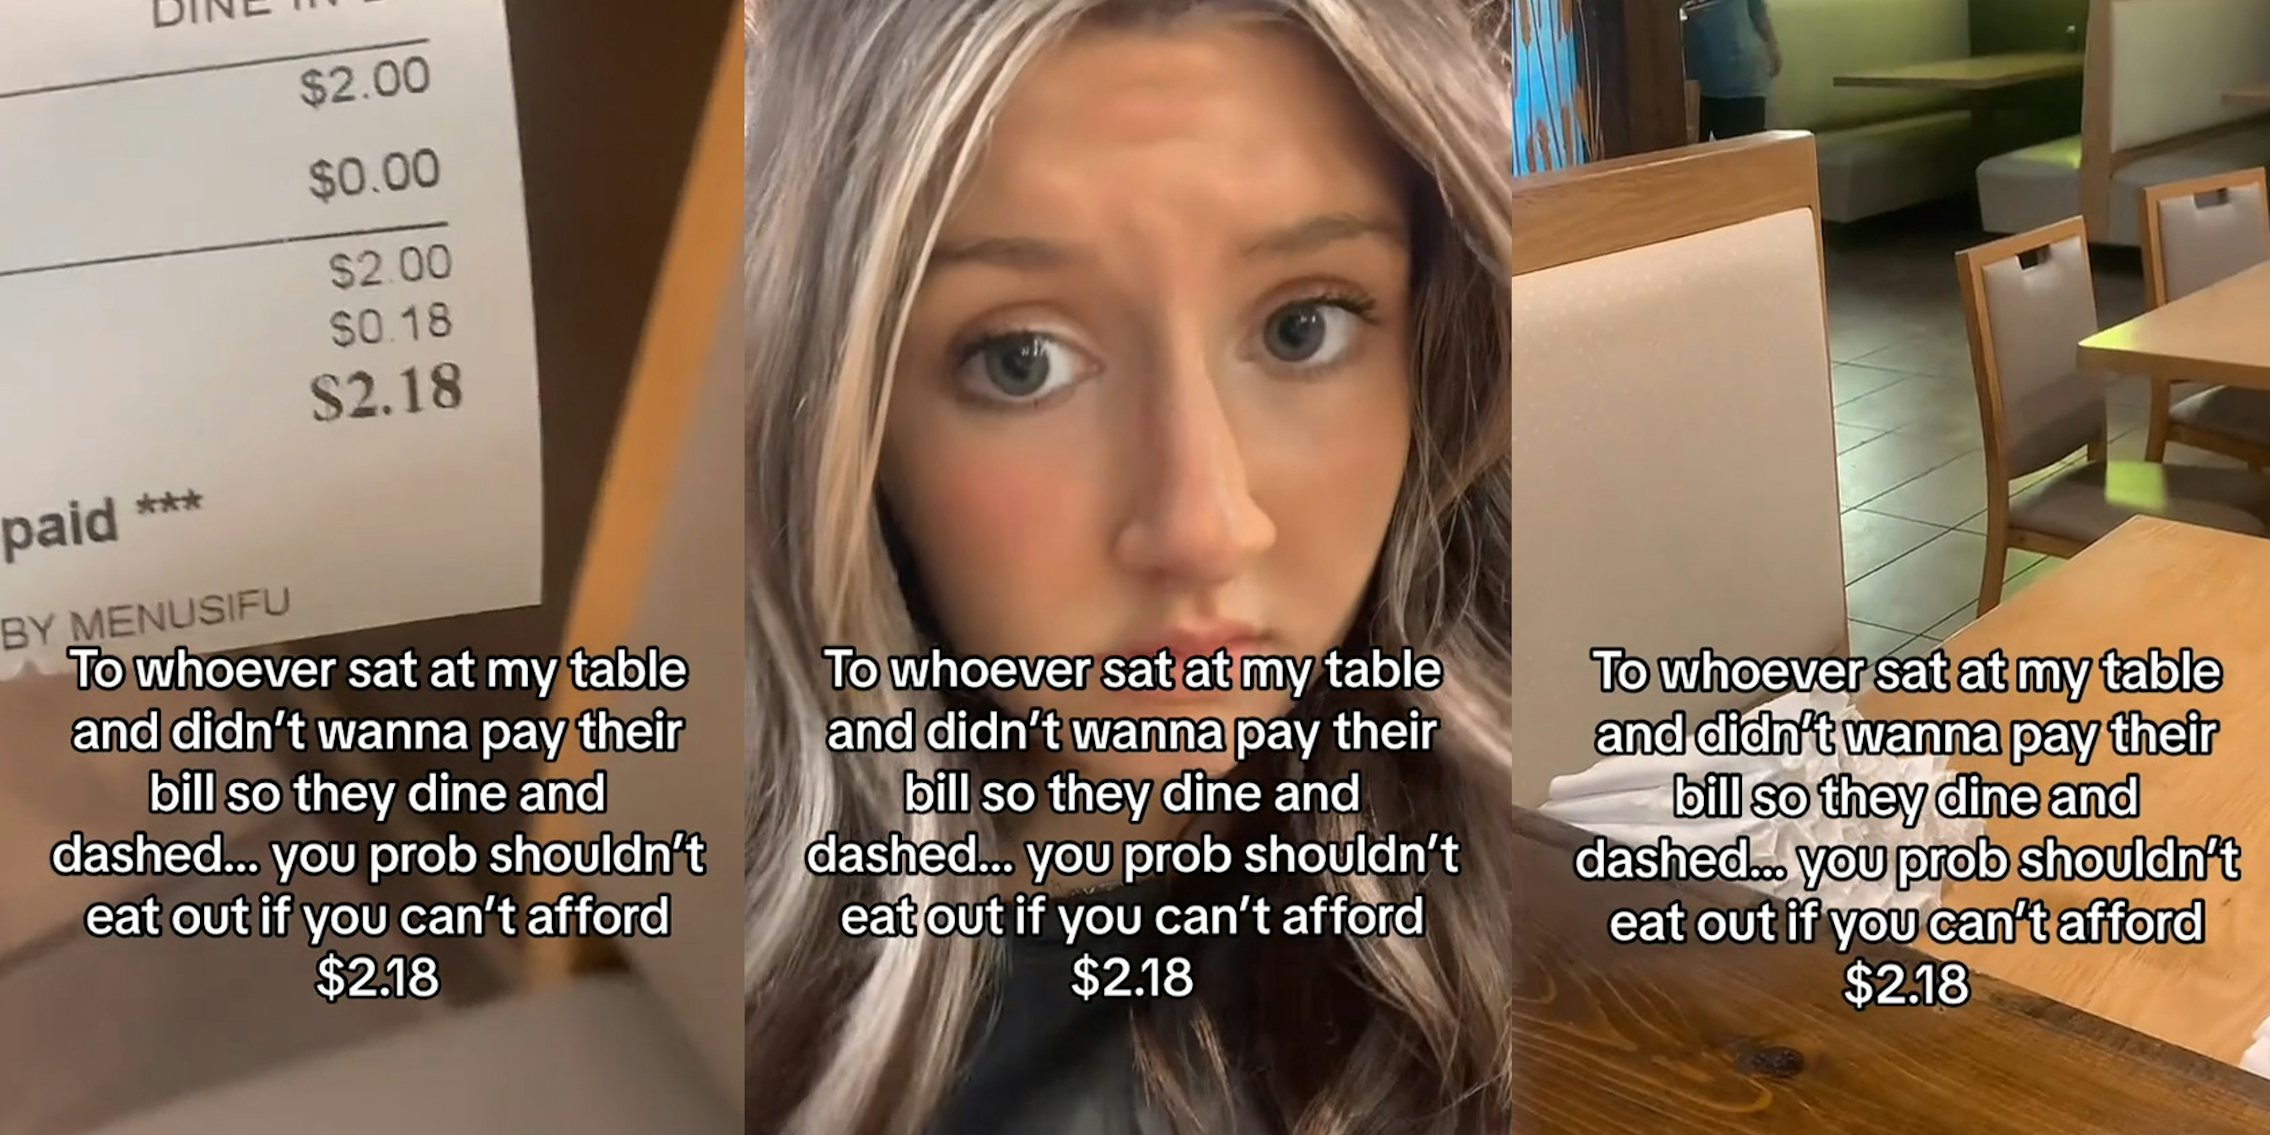 Server calls out customers who dine-and-dash on $2.18 bill